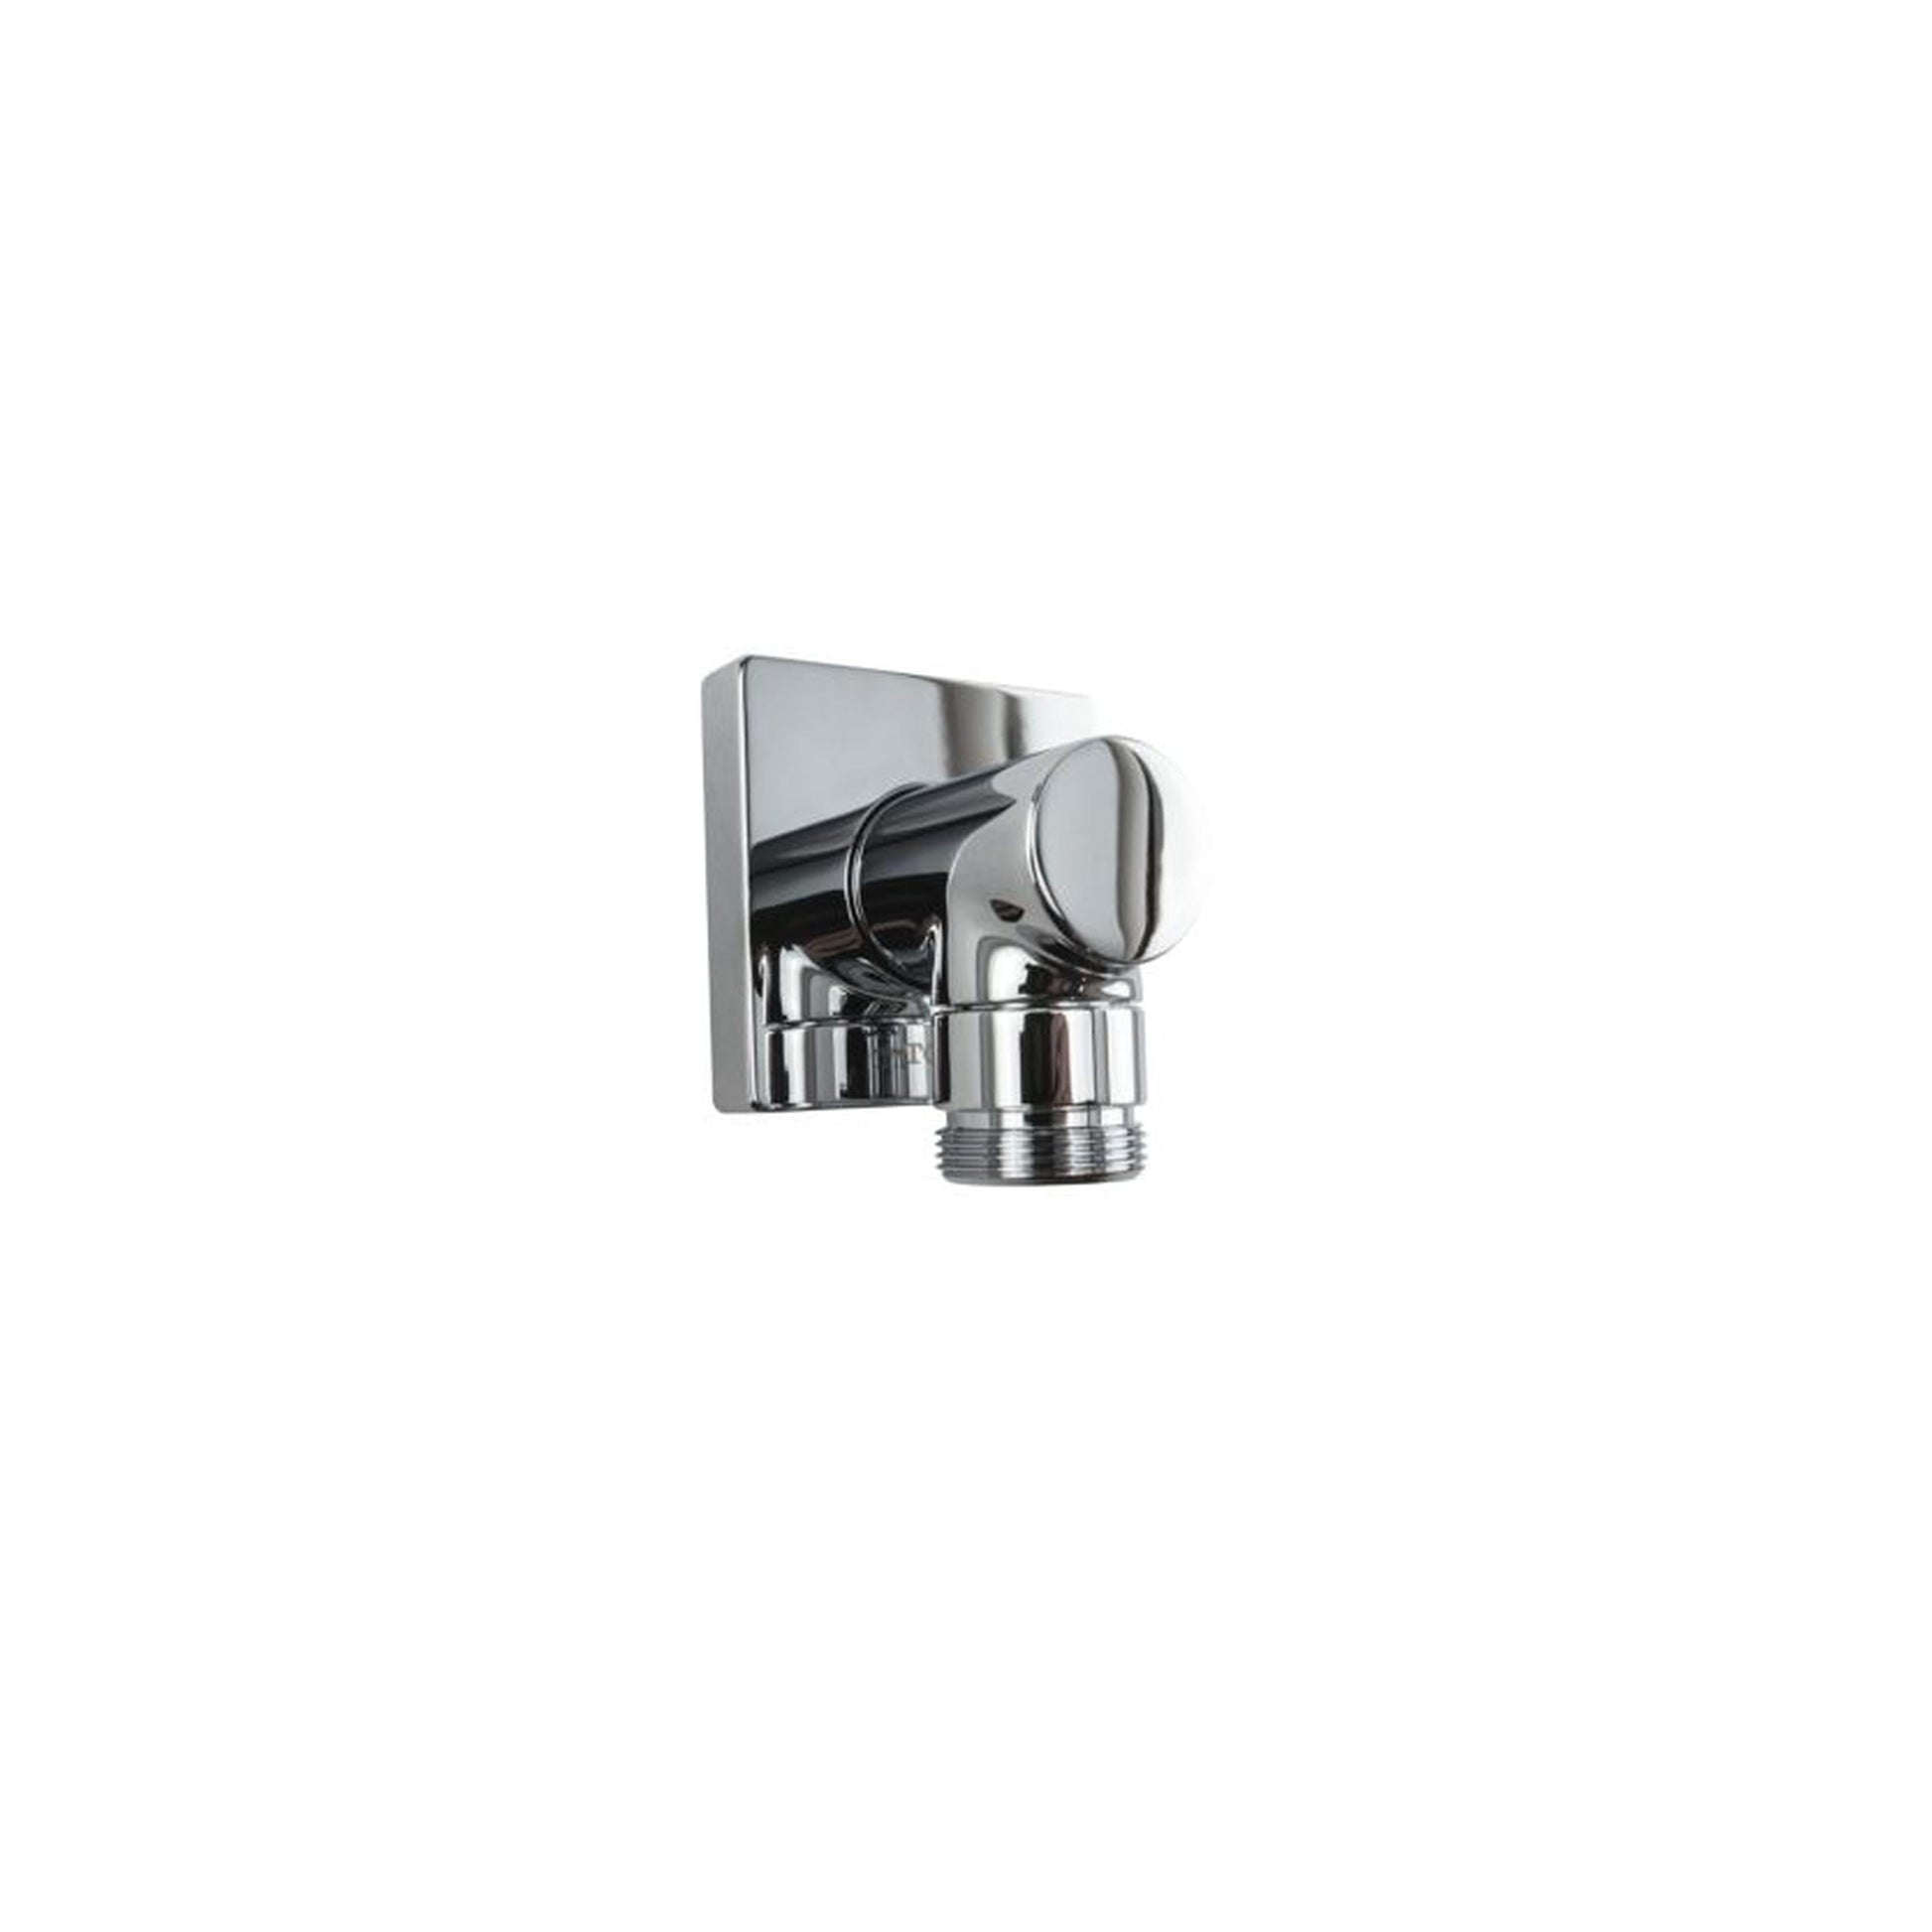 Toto Wall-Outlet, Square Polished Nickel